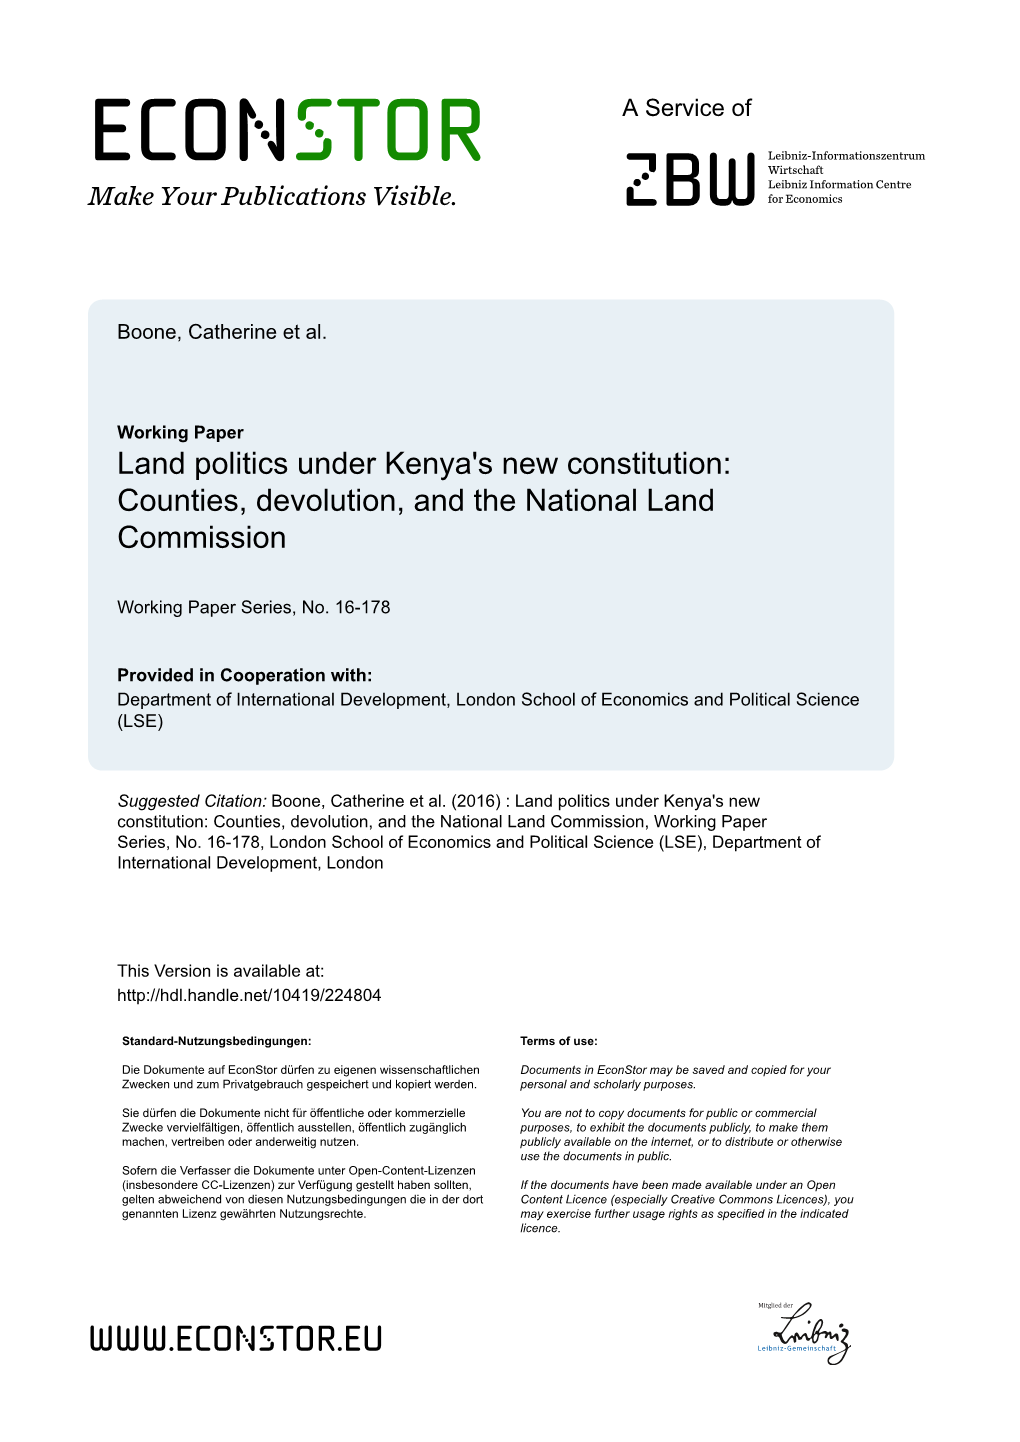 Land Politics Under Kenya's New Constitution: Counties, Devolution, and the National Land Commission